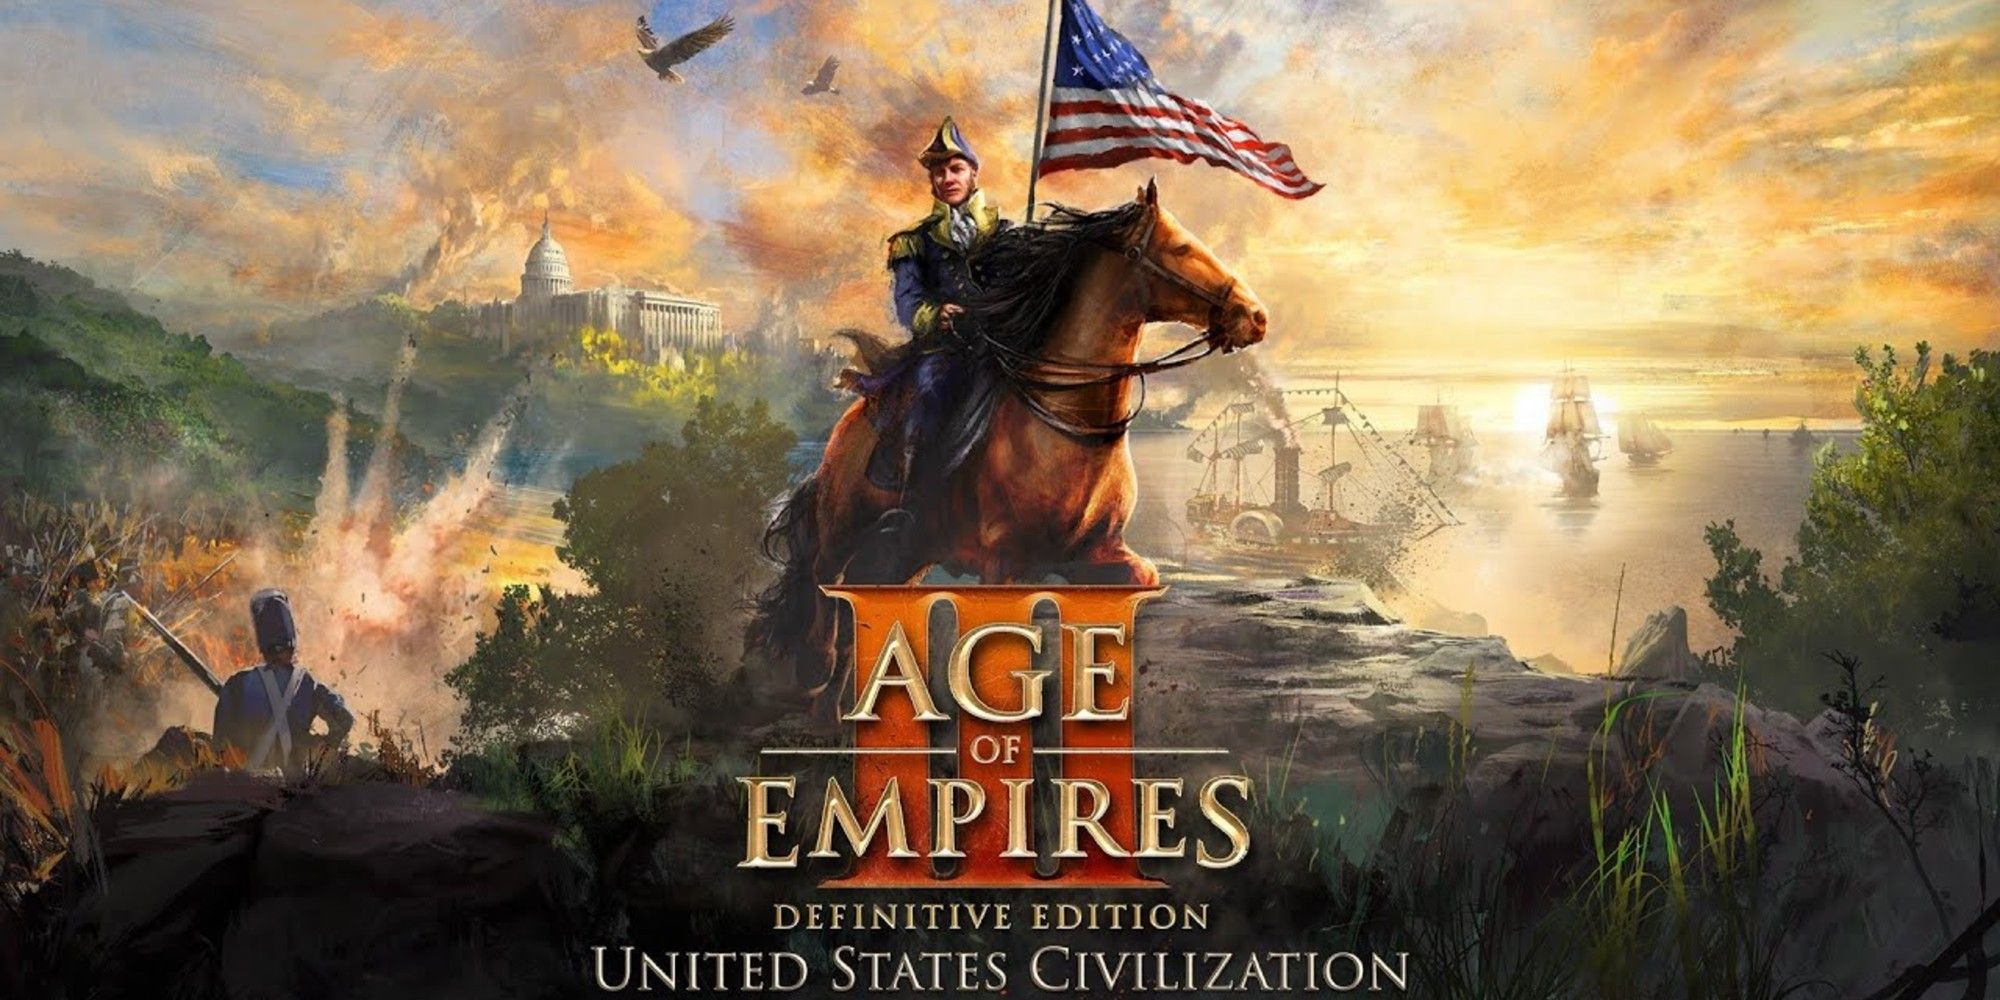 age of empires 3 product key does not work on steam